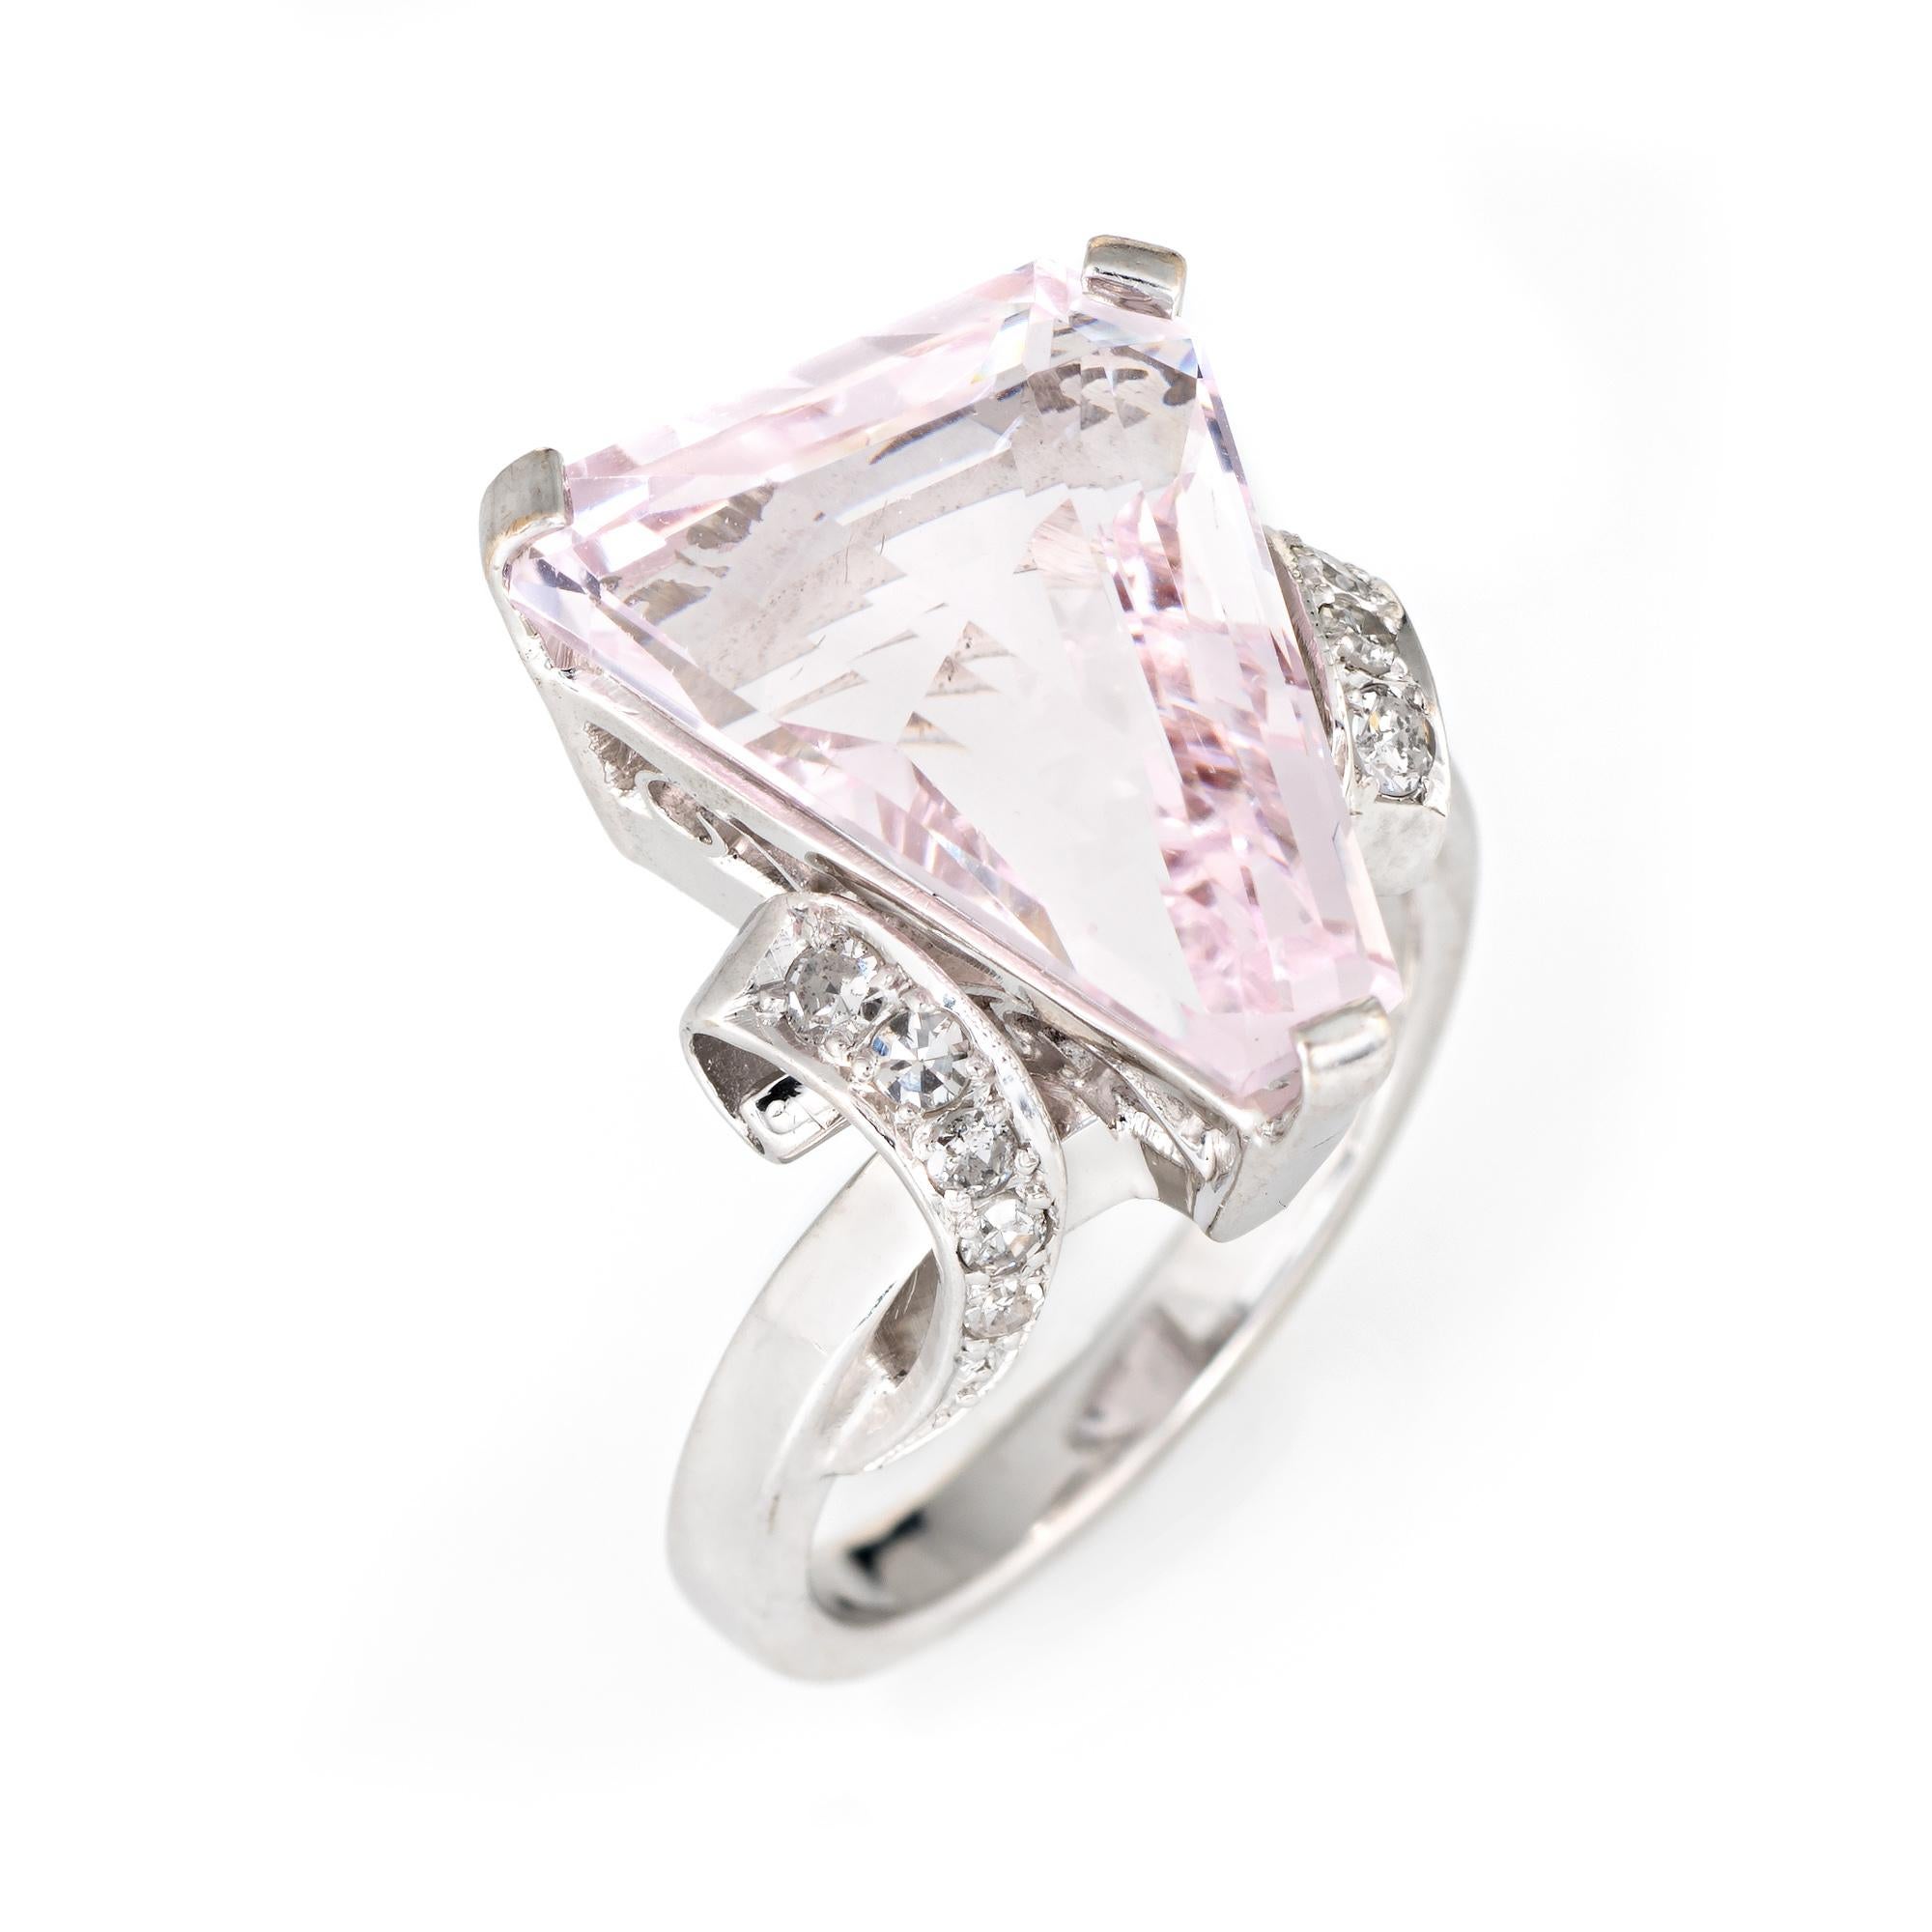 Stylish vintage fantasy cut pink topaz & diamond ring (circa 1980s) crafted in 14 karat white gold. 

Fantasy cut pink topaz measures 16mm x 13mm, accented with 10 single cut diamonds. The total diamond weight is estimated at 0.15 carats (estimated